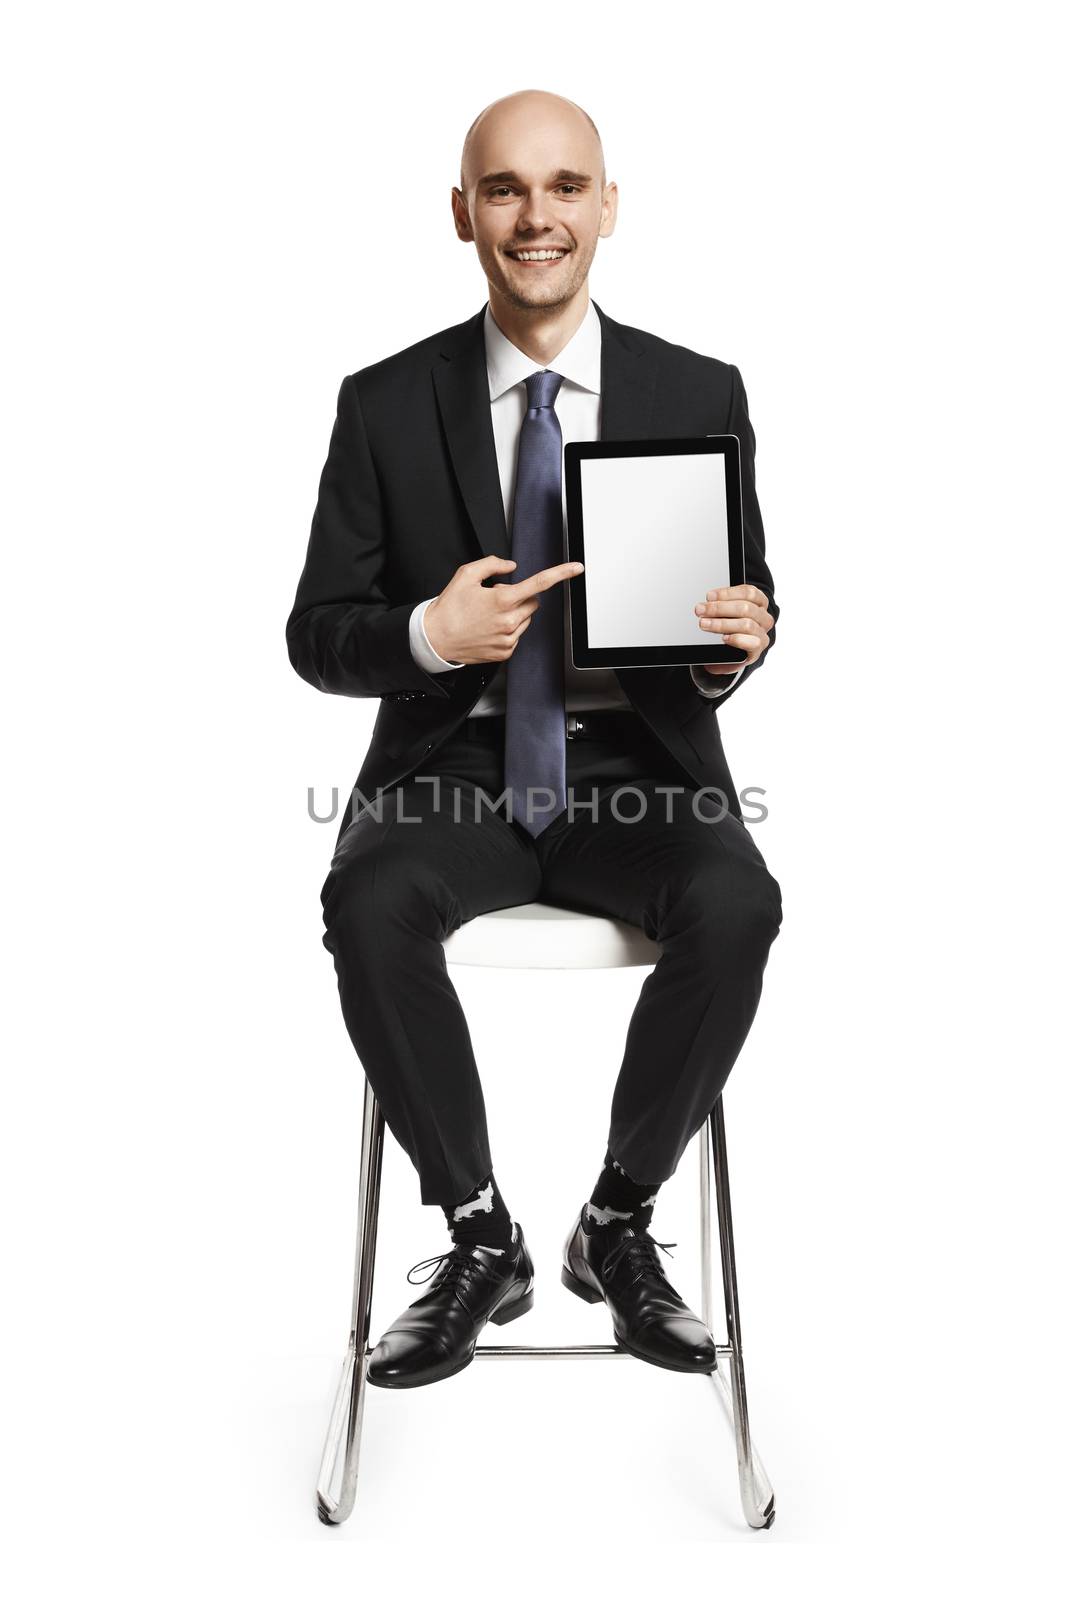 Cheerful young businessman sitting on a chair and showing something on digital tablet. Isolated on white background.